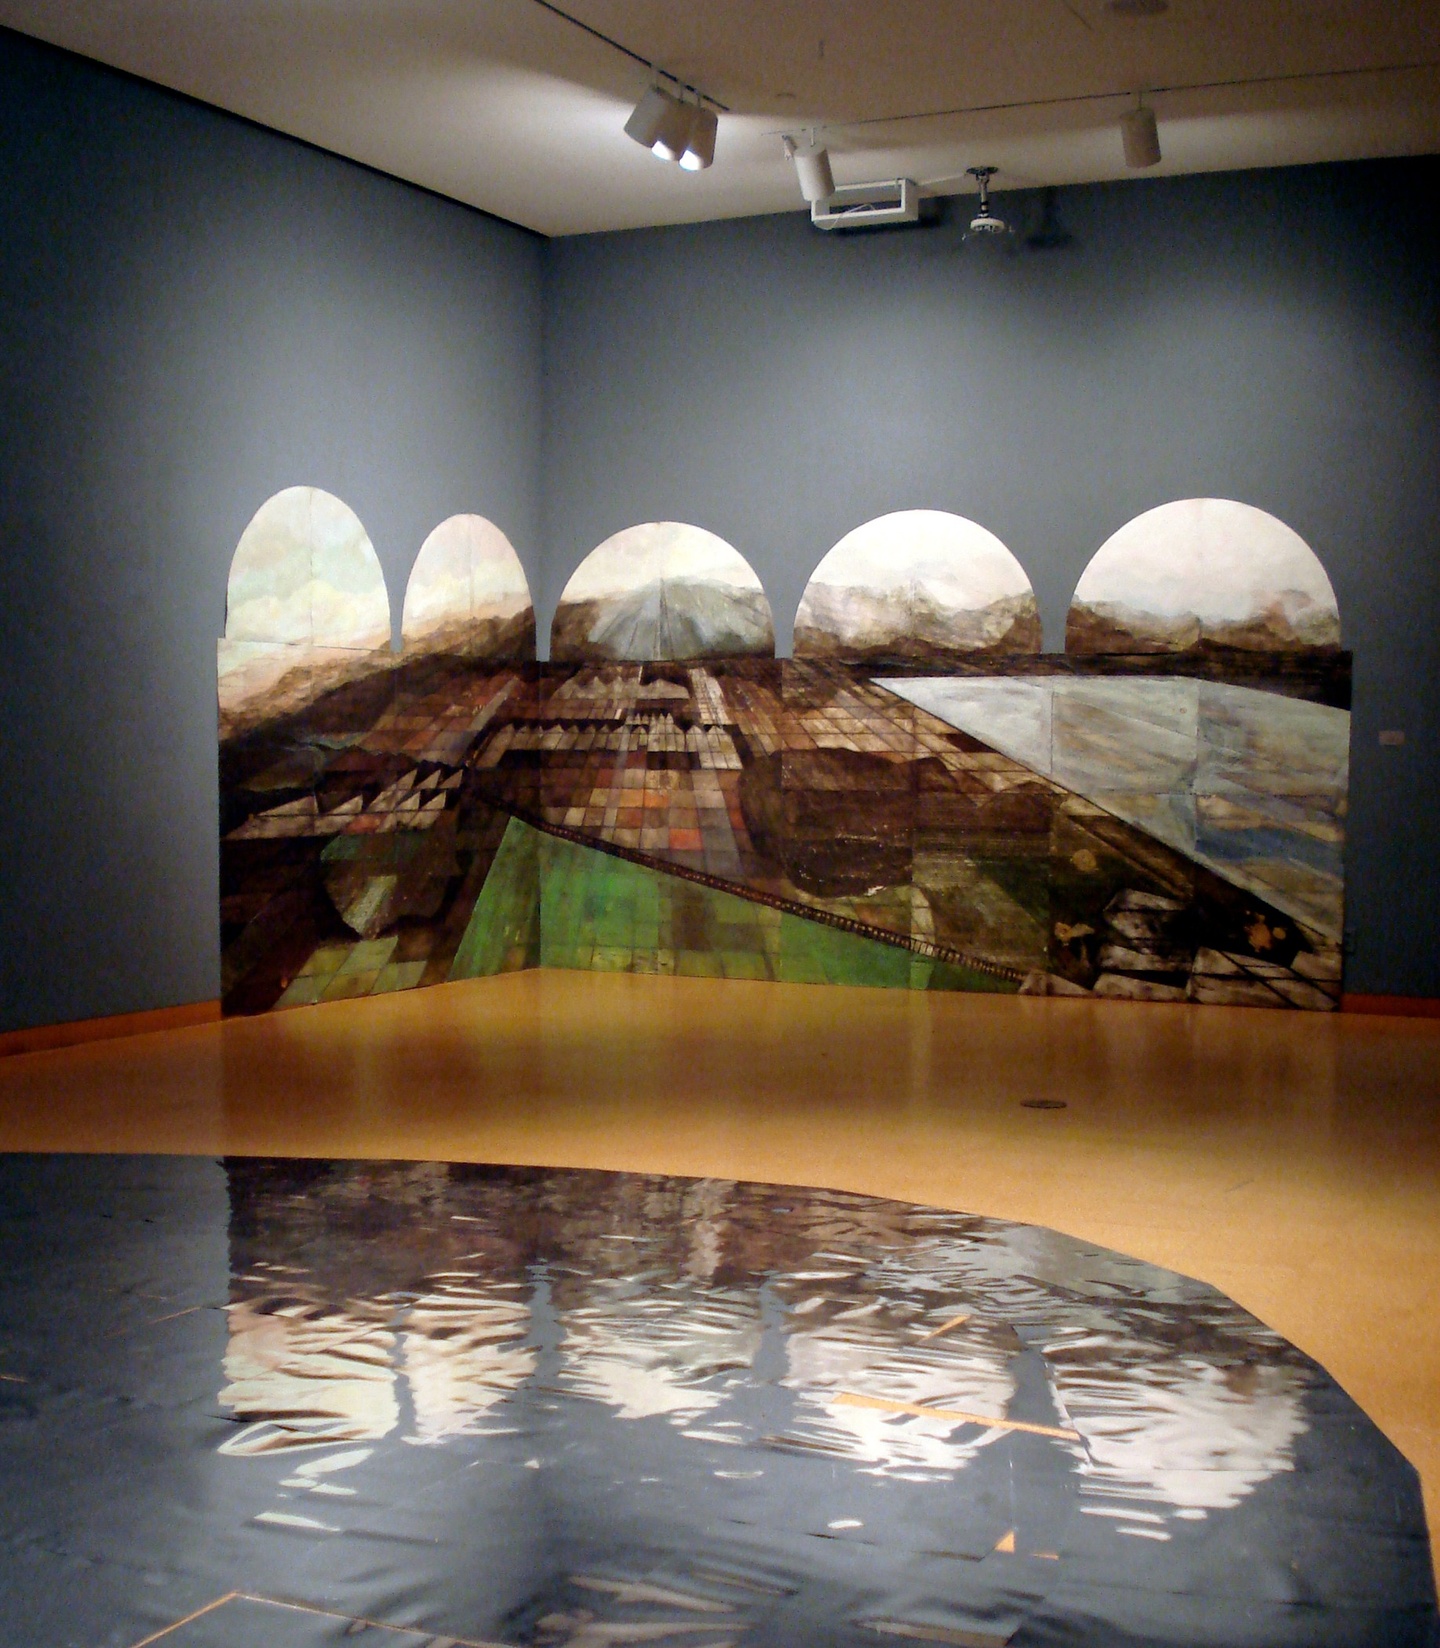 A gallery space: the walls are gray/slate with wooden floors: a landscape is installed along the corner of the space, as if the walls frame the landscape, outlined in five rounded arches; in the foreground on the floor is a reflective surface that shows the reflections of the landscape in the back, as if the glimmering ripples of a pond. Lights on the ceiling illuminate the corner of the space with the landscape, casting a shadow on the ground between the corner and the foreground.